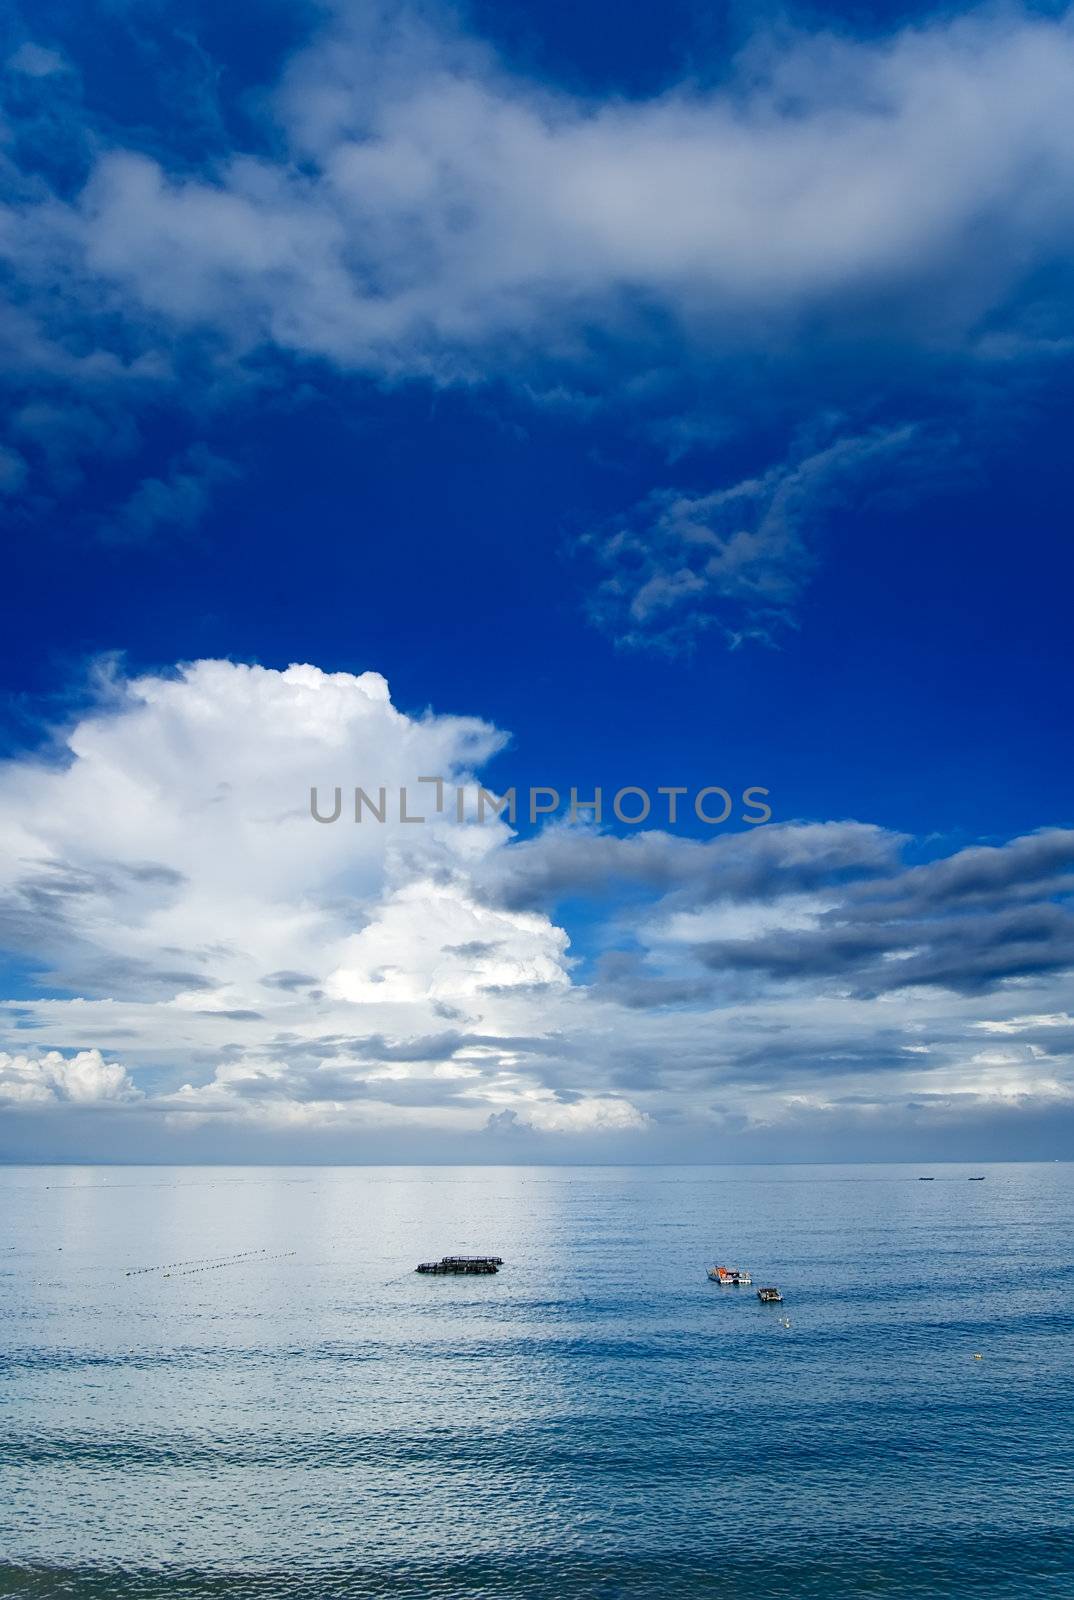 It is beautiful sky and ocean with fishing boats.